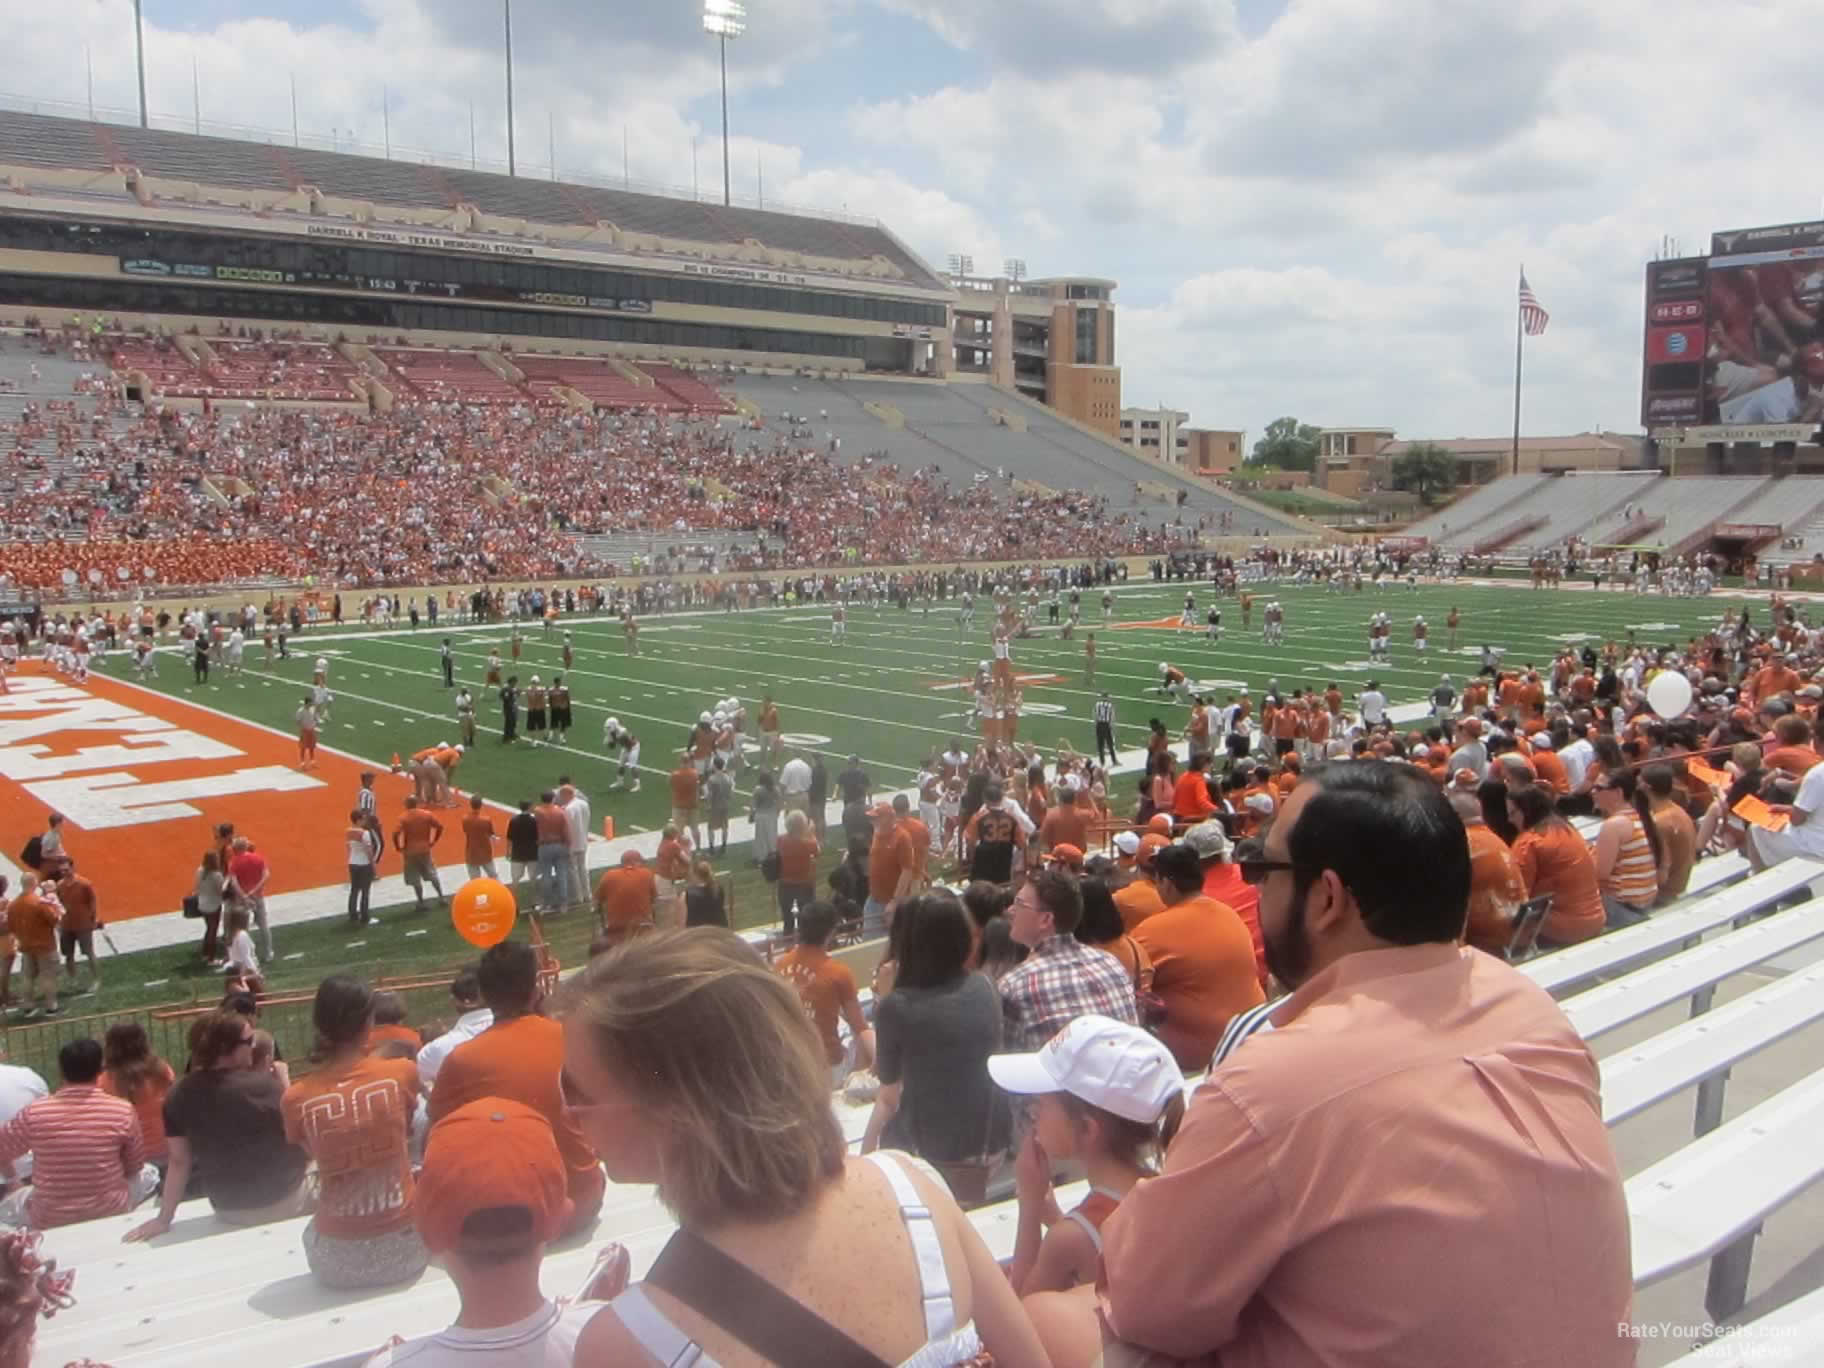 section 8, row 16 seat view  - dkr-texas memorial stadium